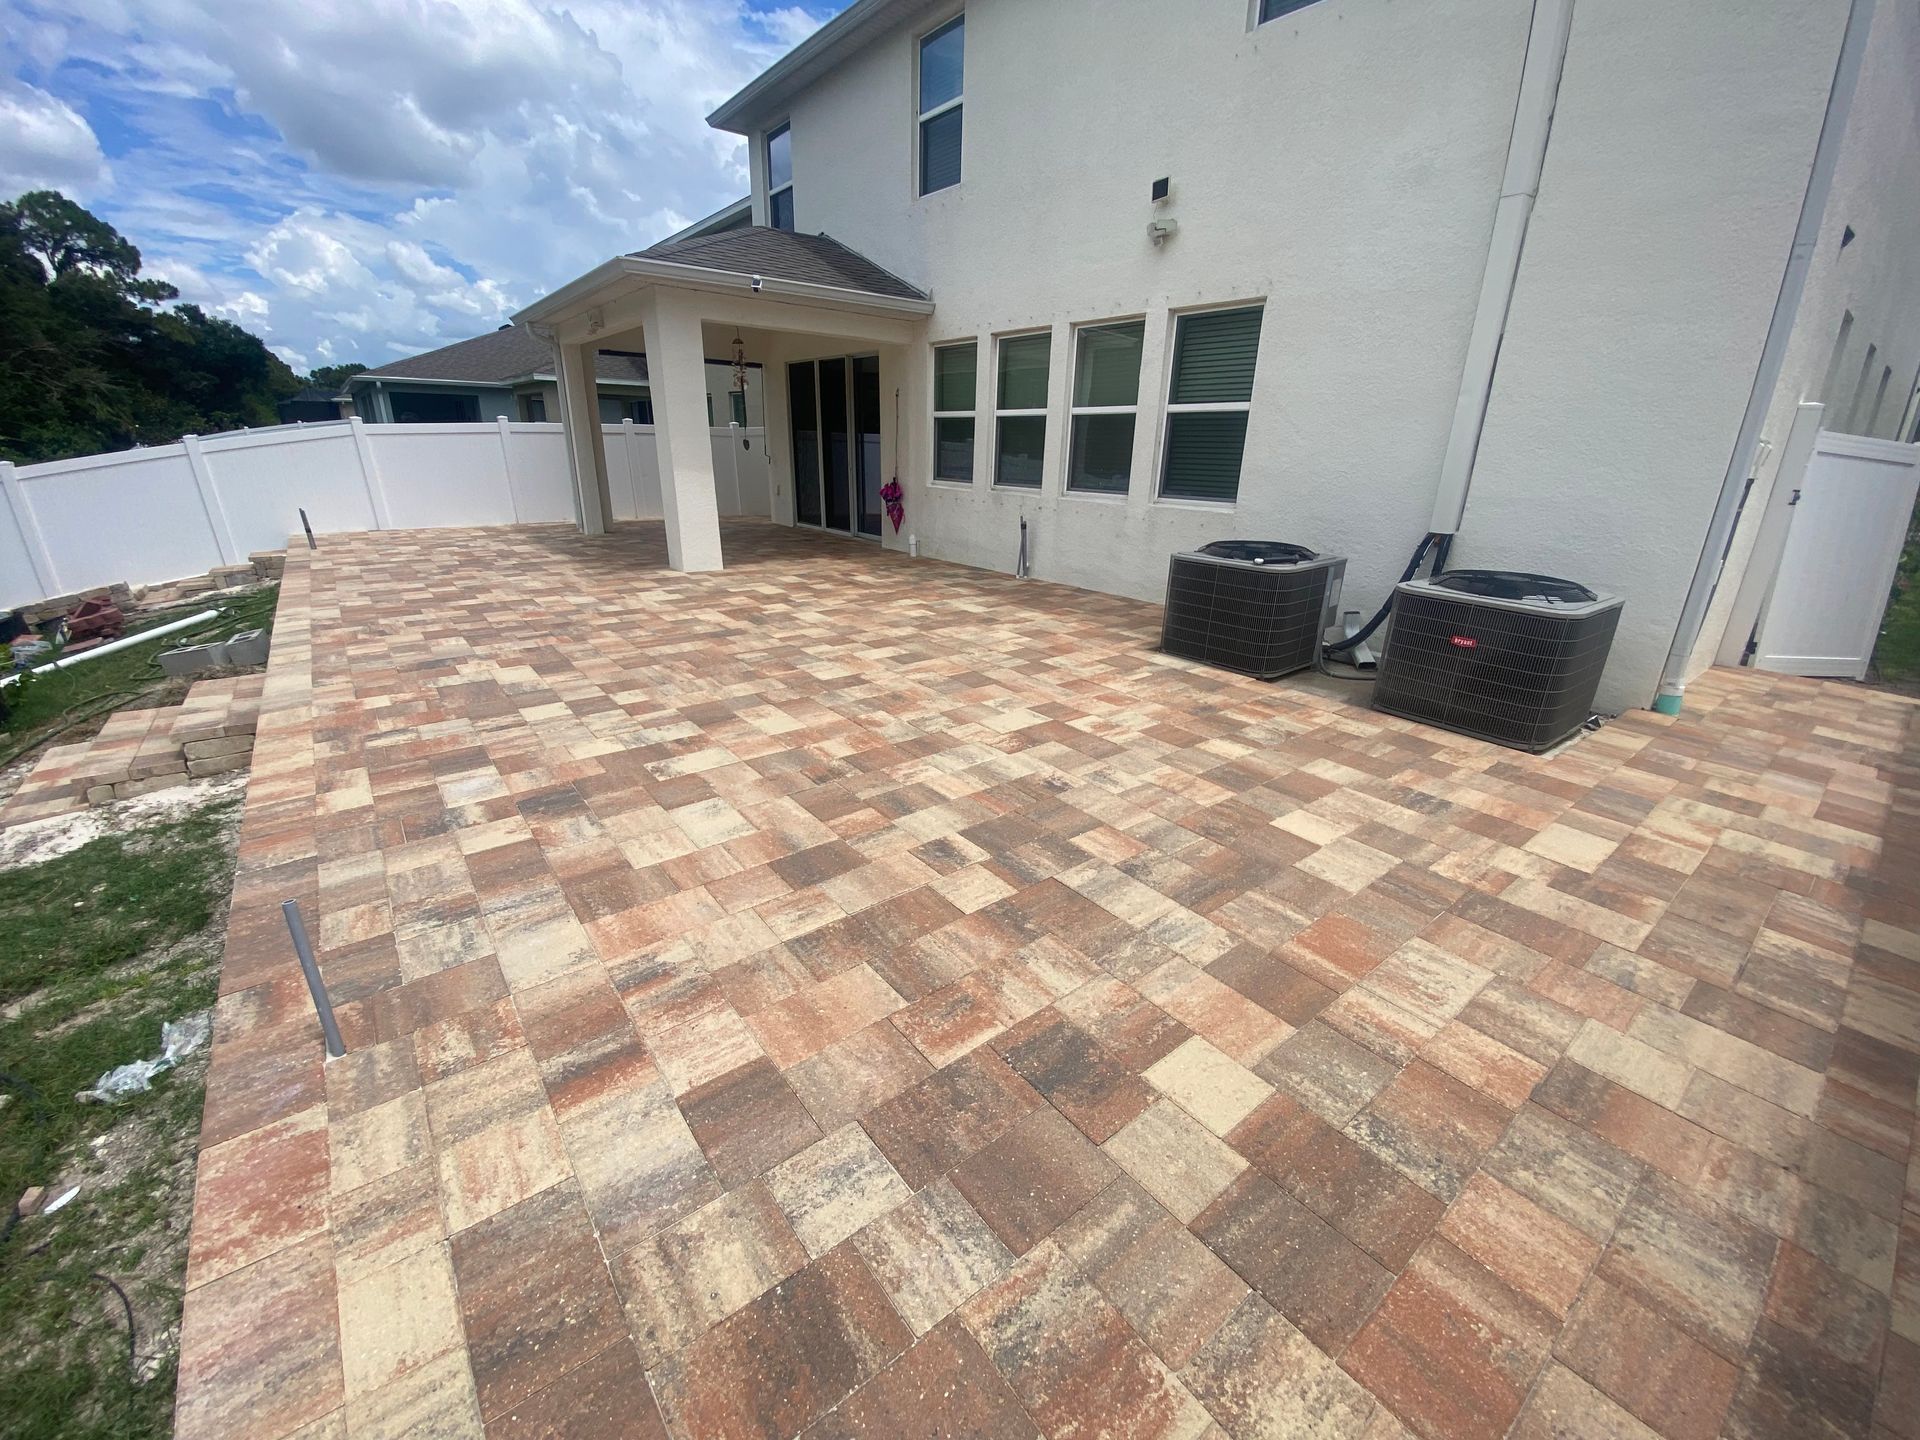 Flagstone - Victory in Cream/Orange/Pewter. Patio in Tampa, FL